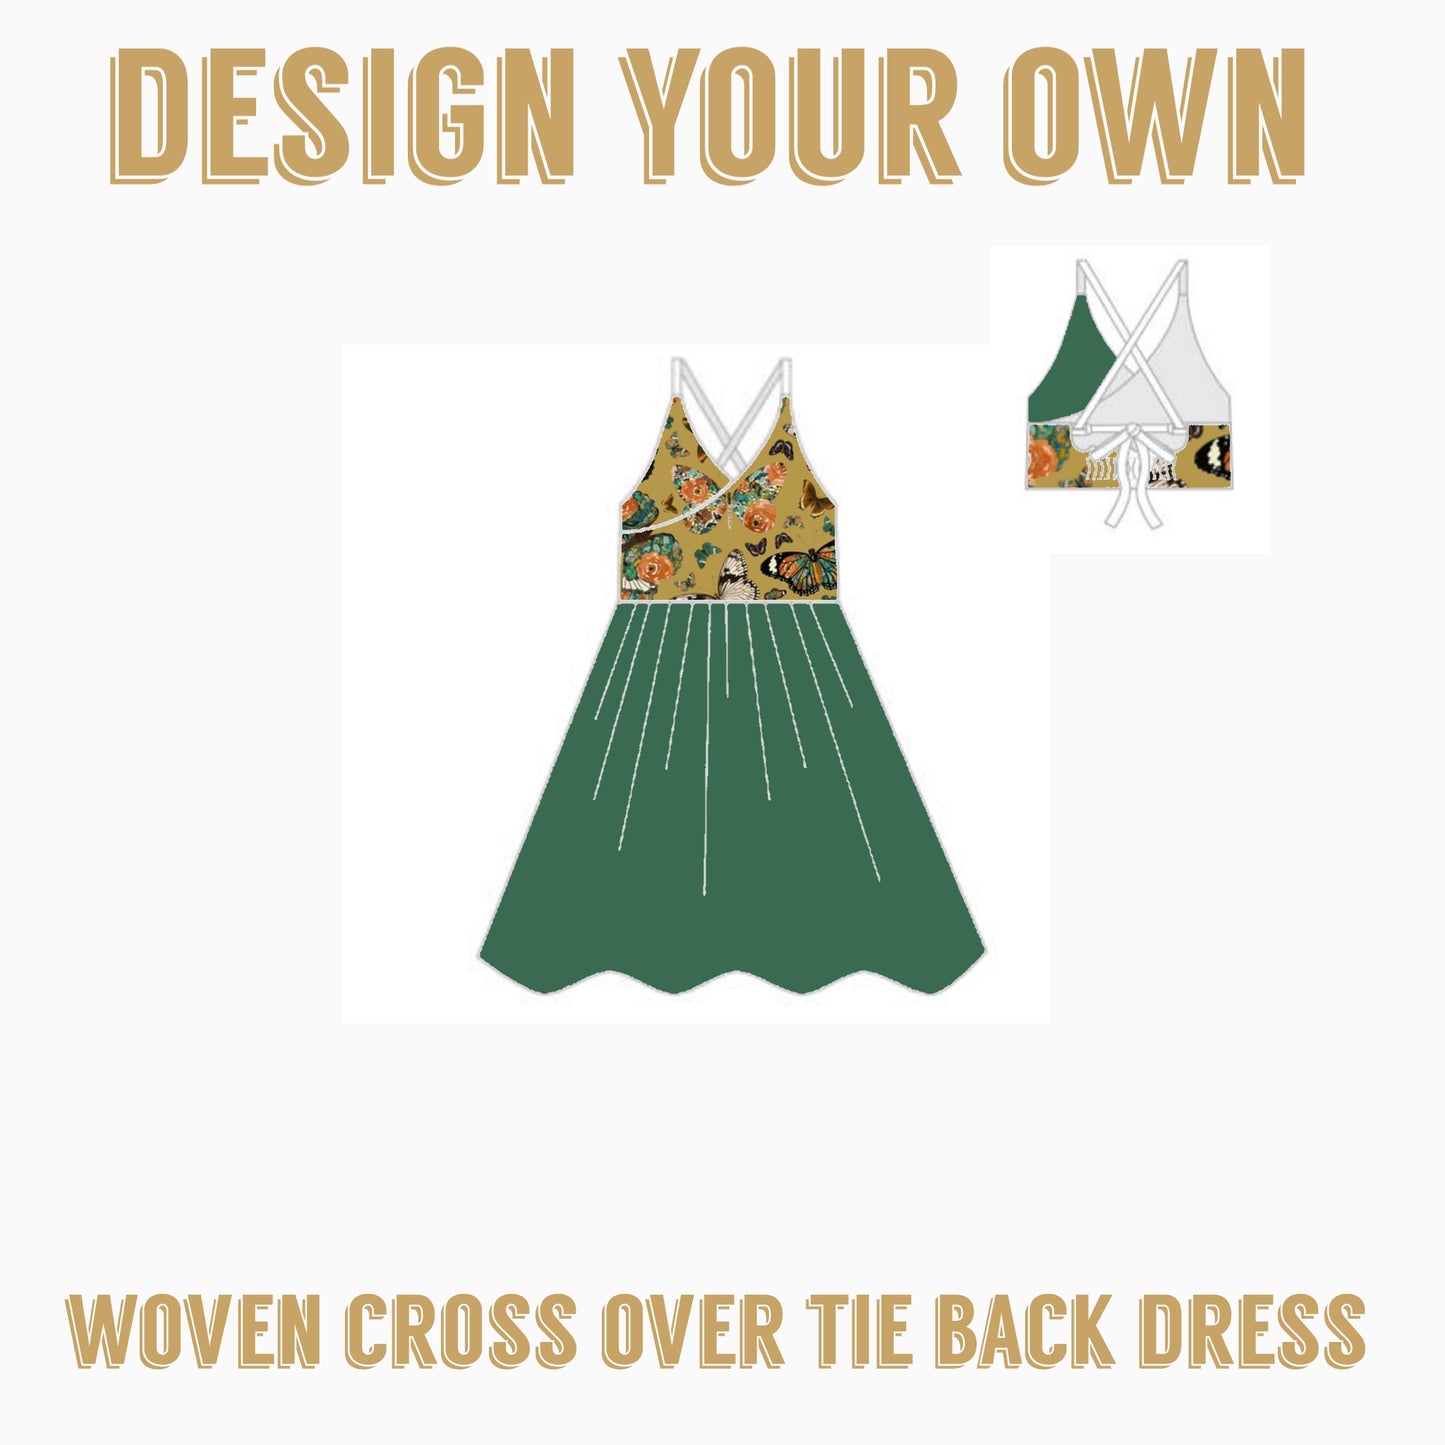 Design your own | Woven Cross over tie back Dress